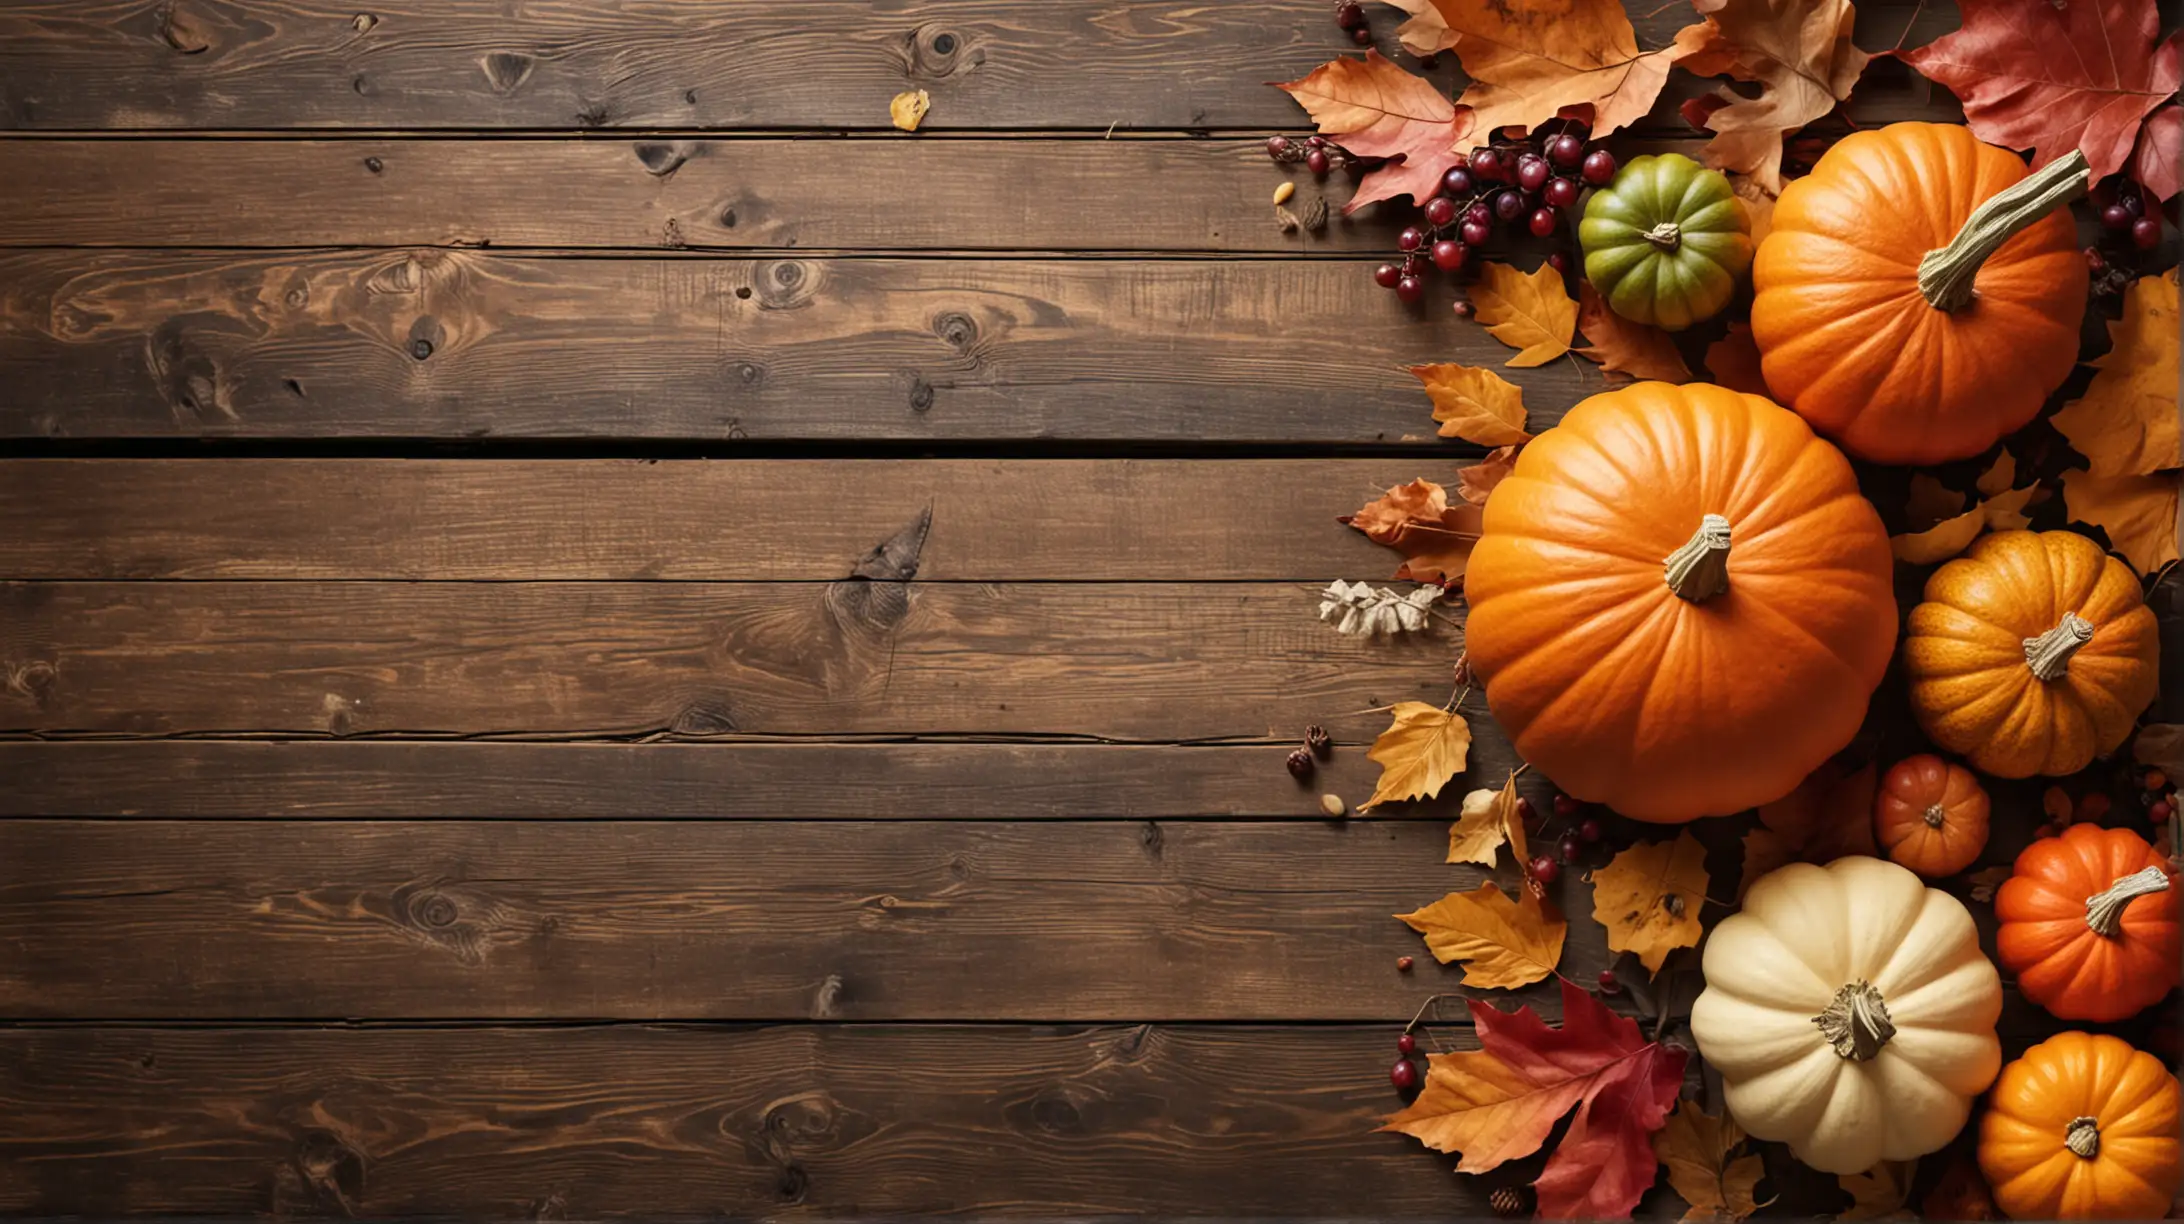 Thanksgiving concept. Colorful pumpkins, fruits and fall leaves on rustic wooden background